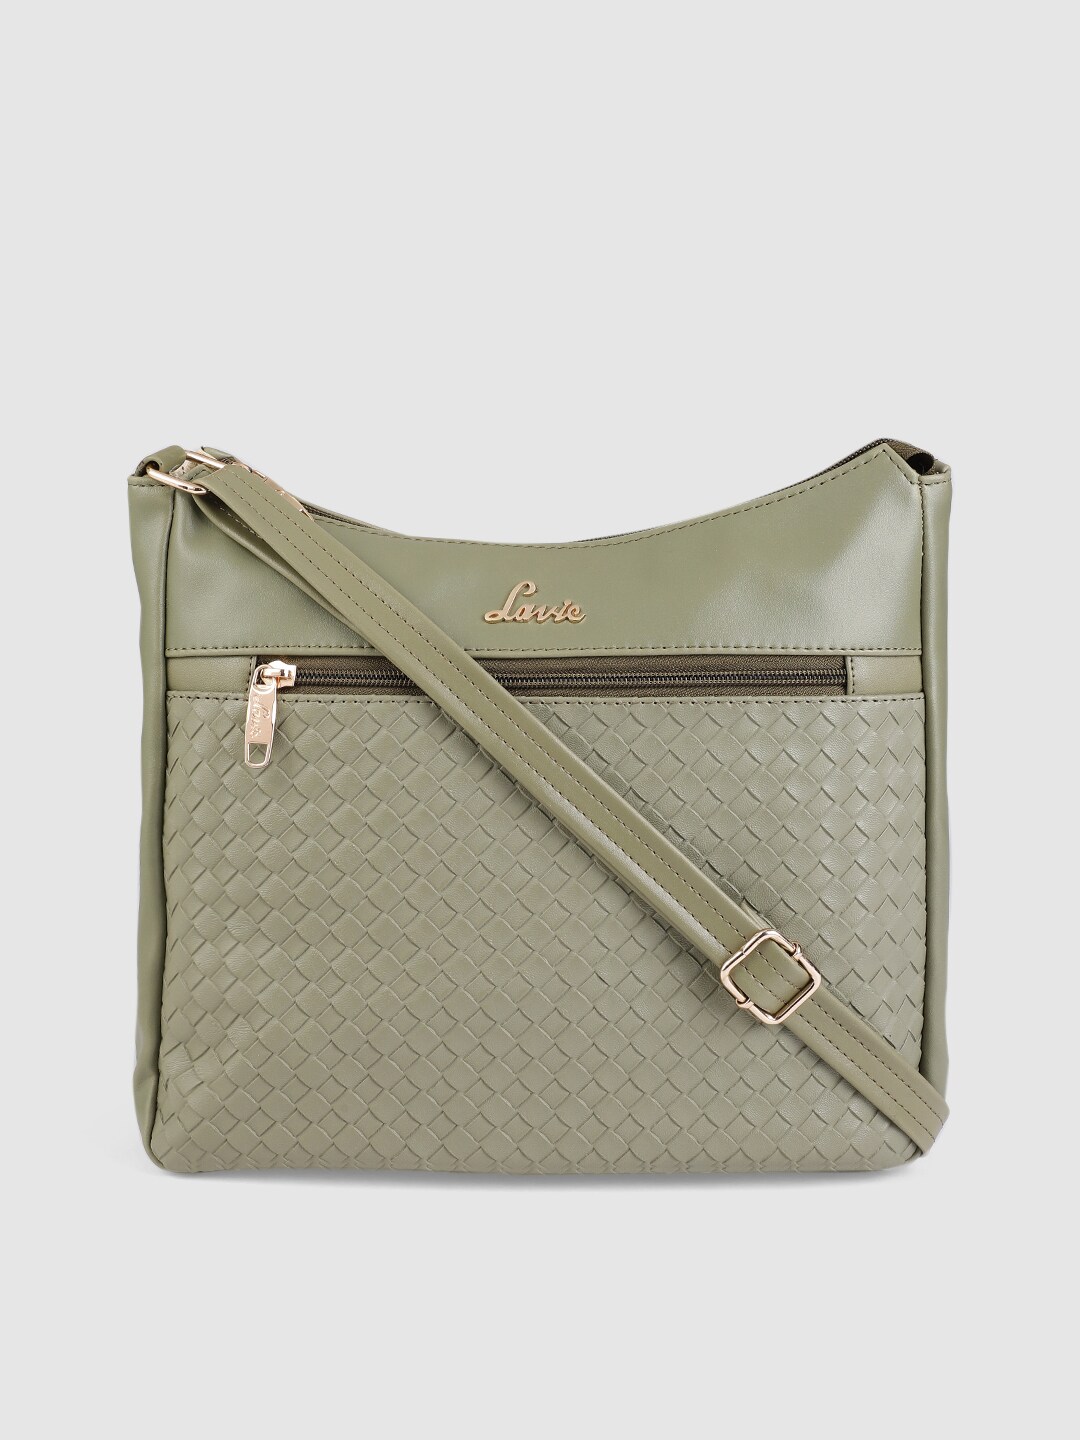 Lavie Olive Green Textured Sling Bag Price in India